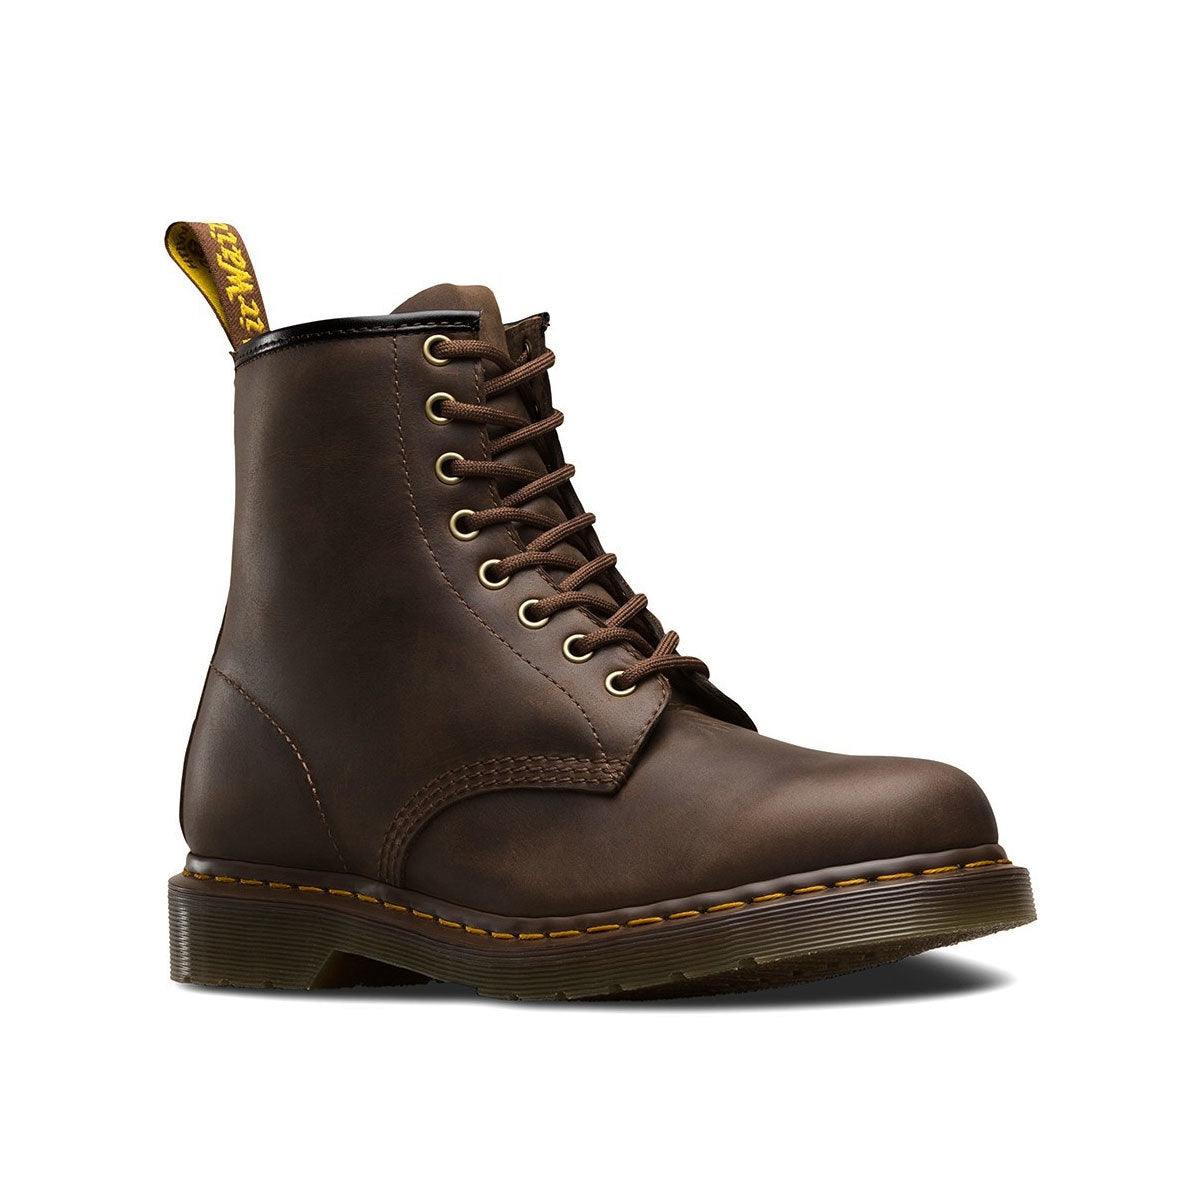 Dr Martens 1460 Crazy Horse Leather - The Next Pair